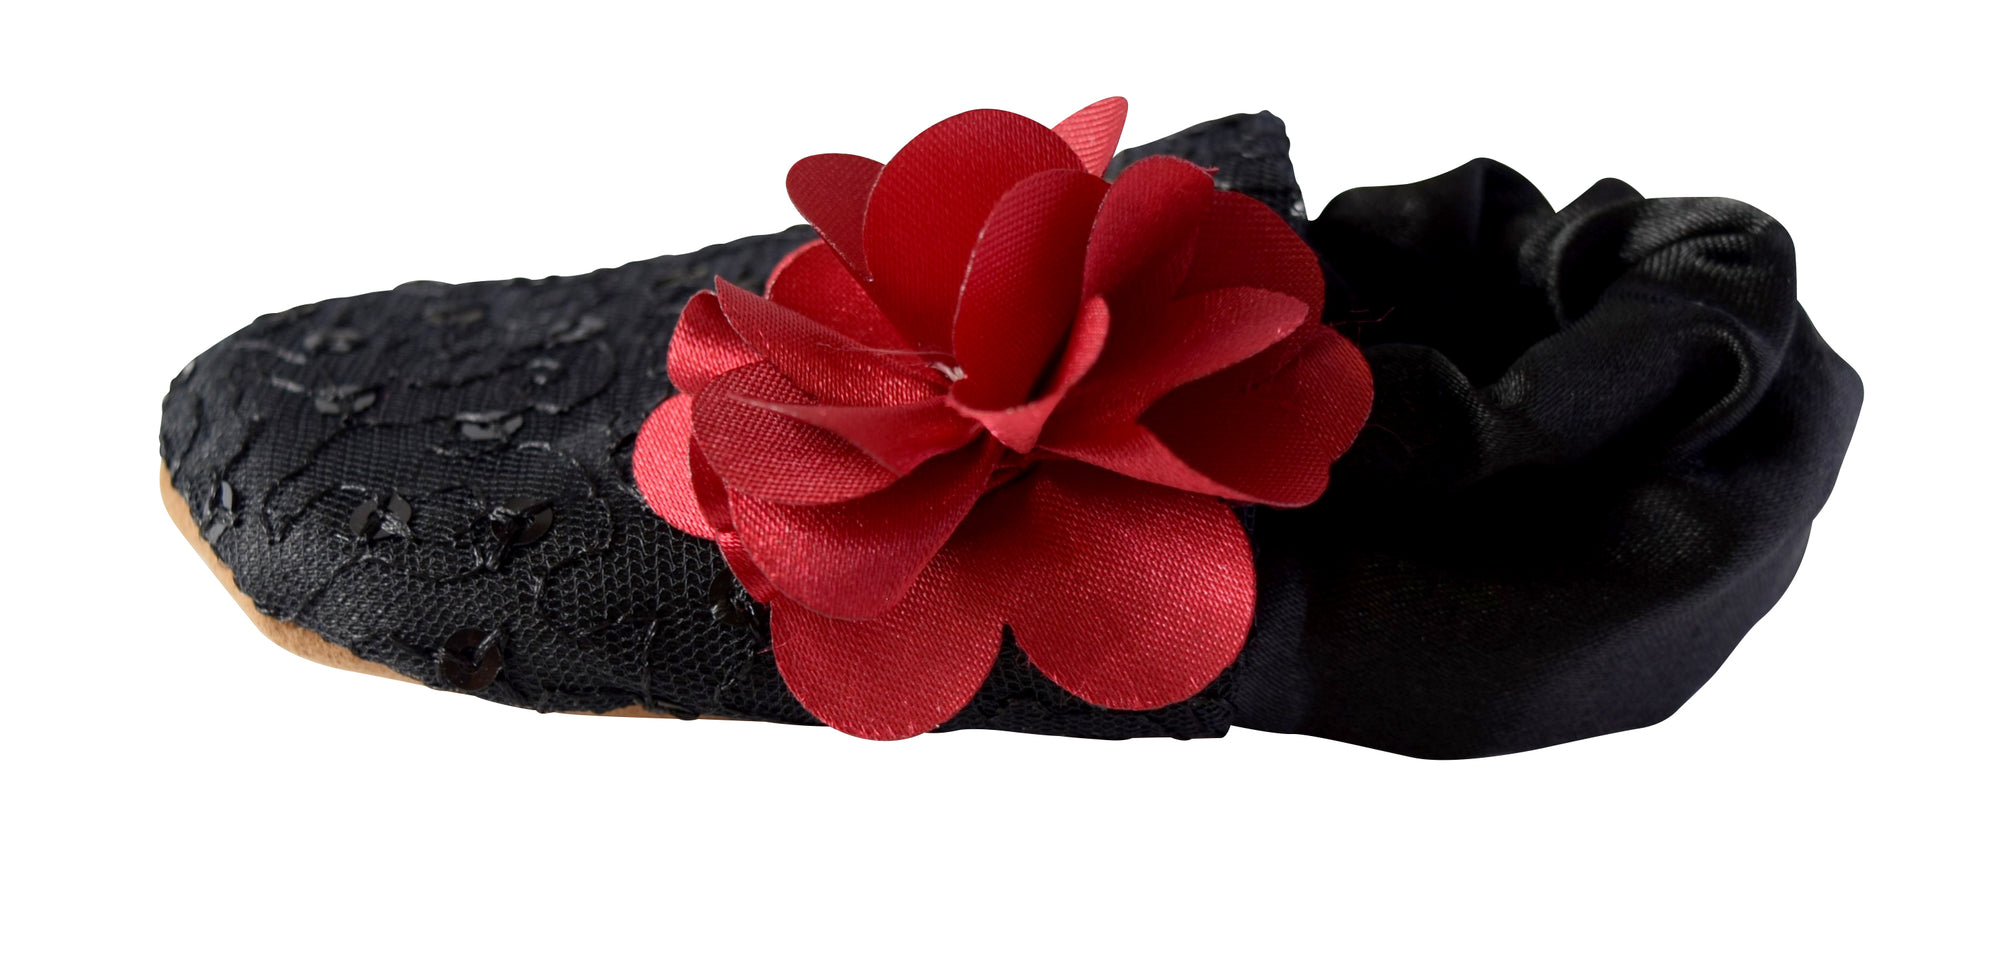 Kids Shoes_Black Mono Lace on Black Satin with Maroon Flower Booties